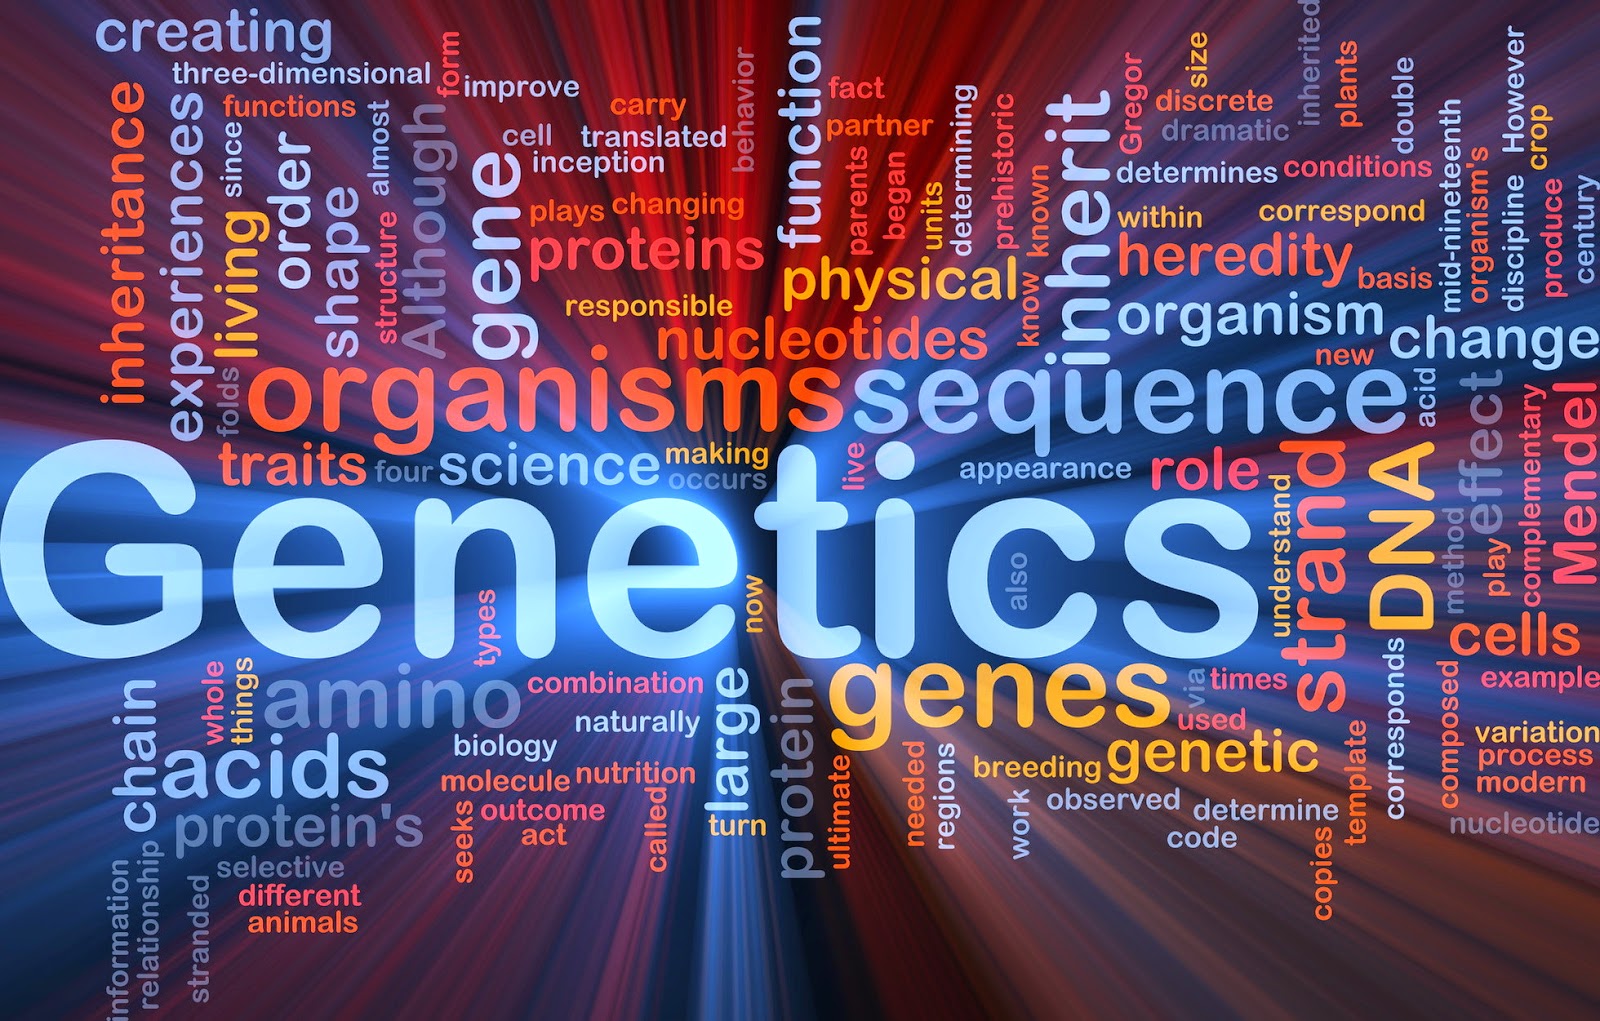 Some important terms used in genetics